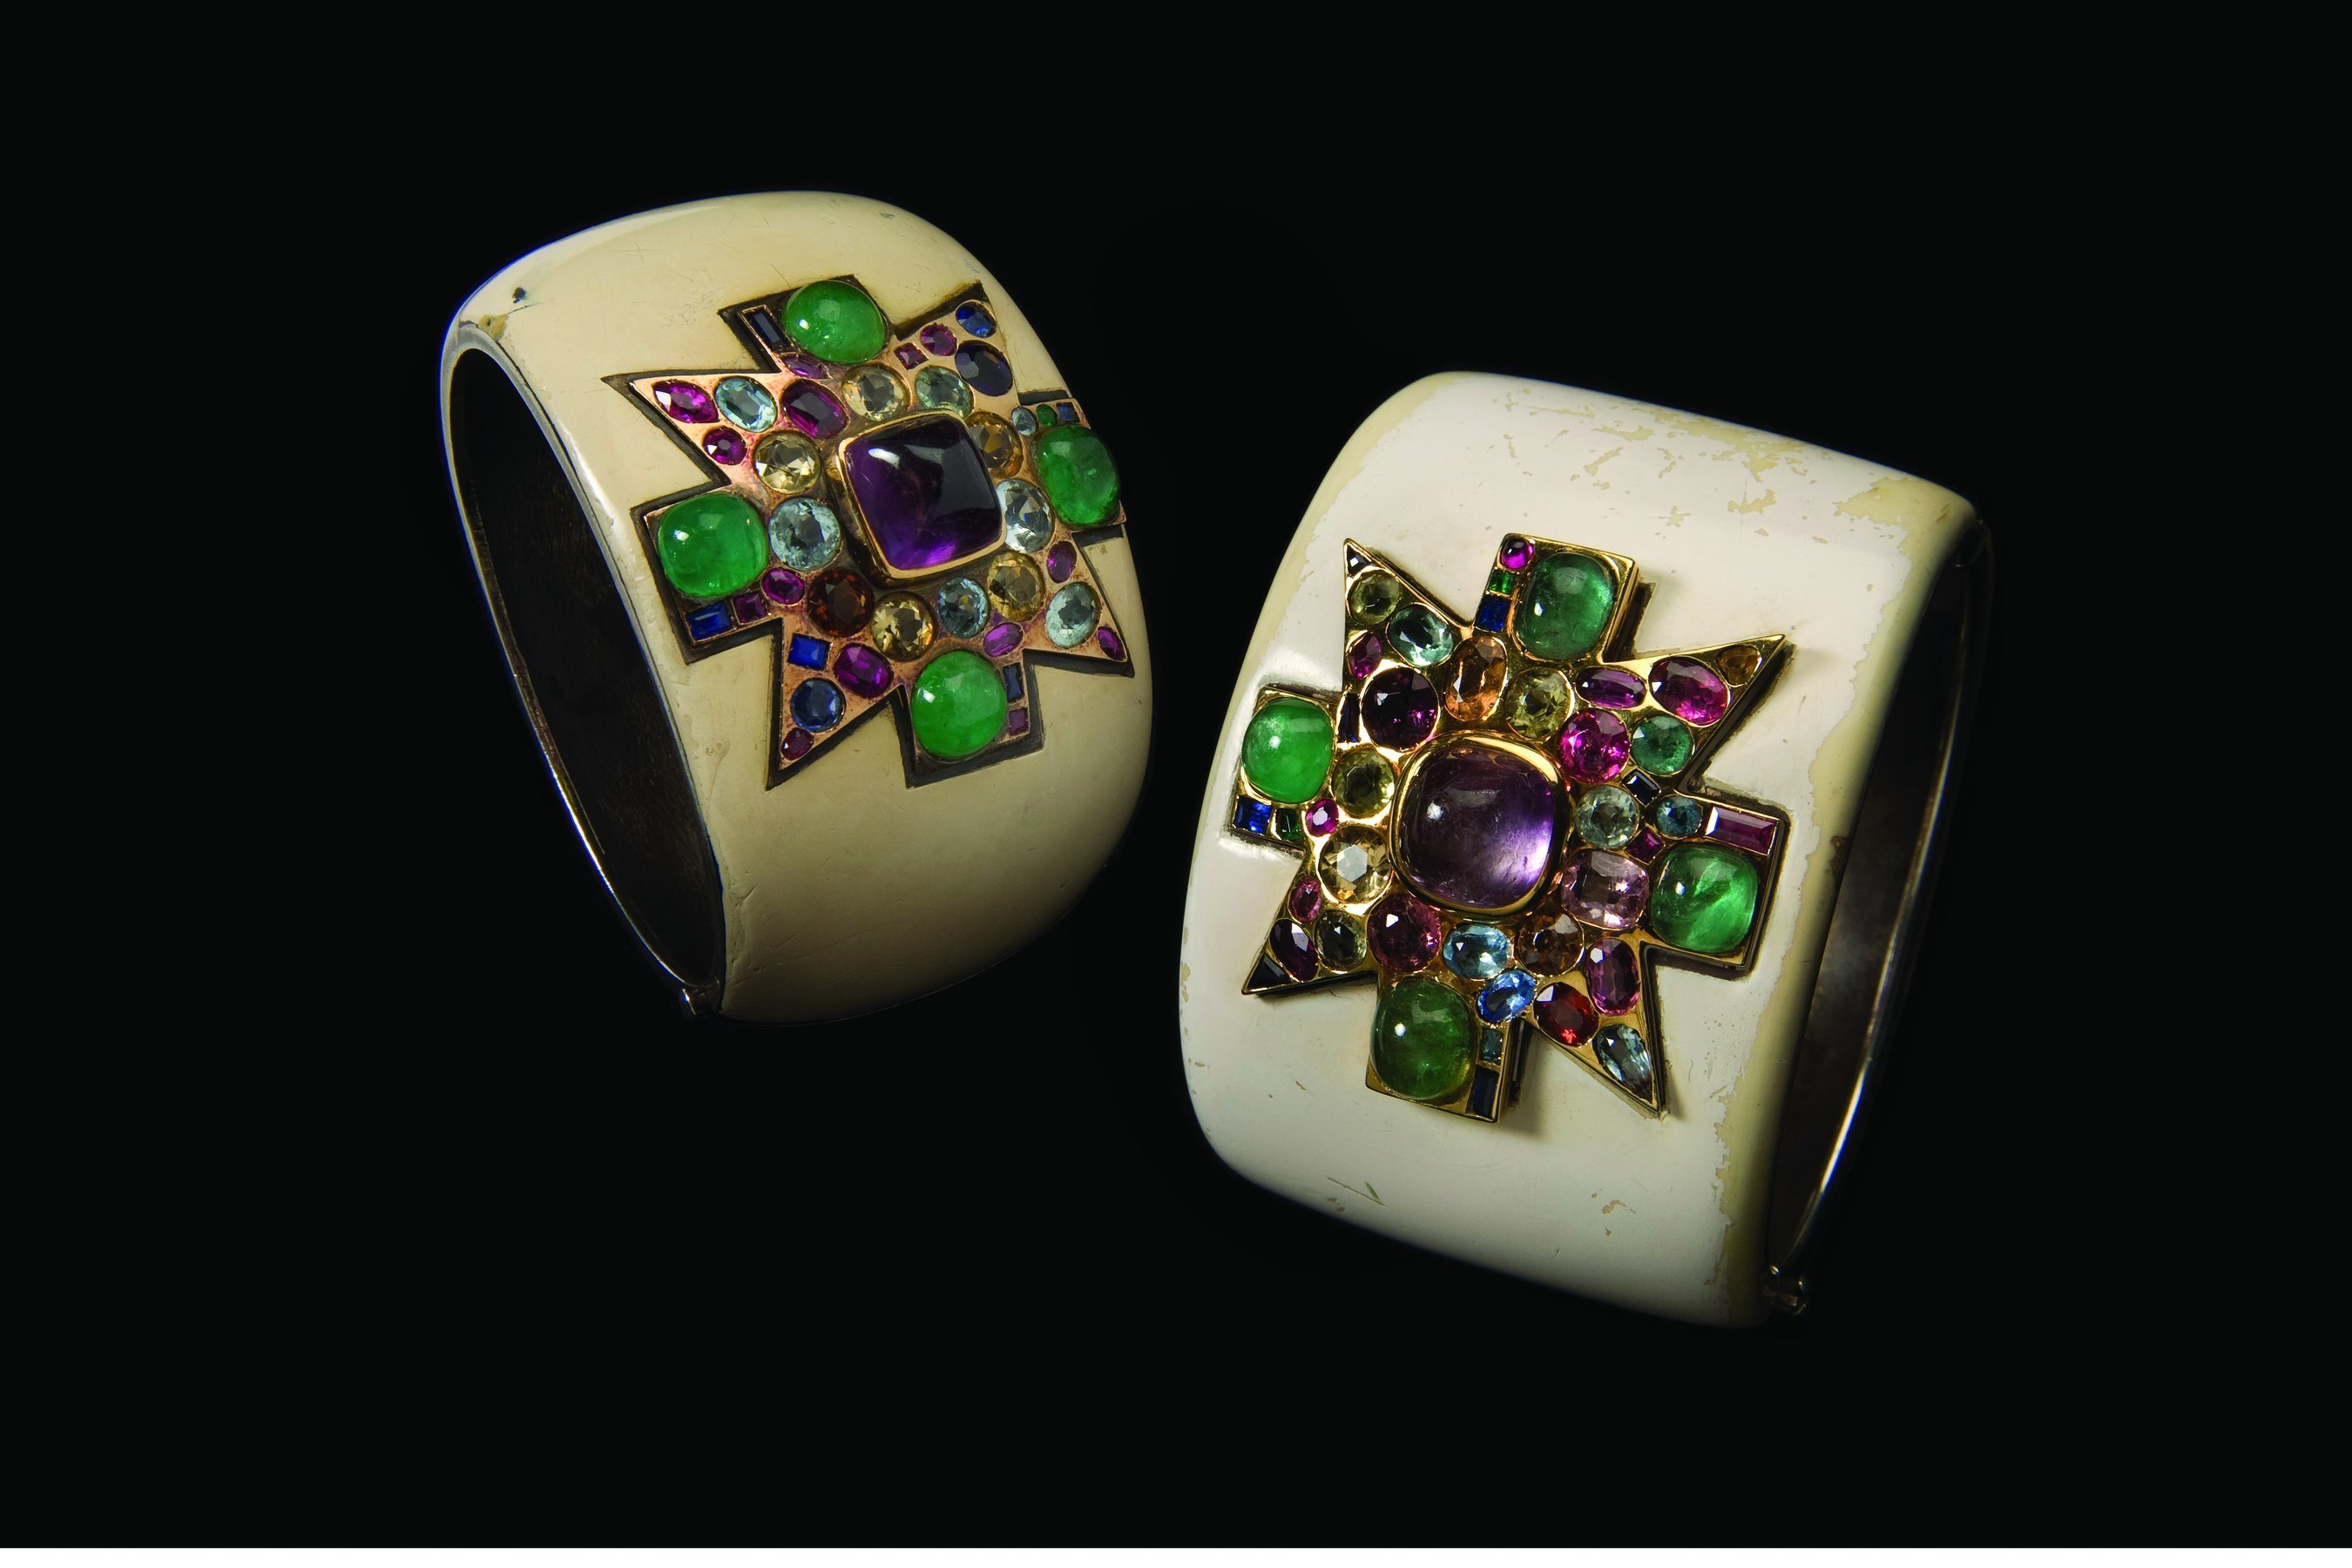 Coco Chanel's original "Maltese Cross" cuffs designed by Fulco di Verdura circa 1930 will be featured in "The Power of Style: Verdura at 75" on view through December 23.